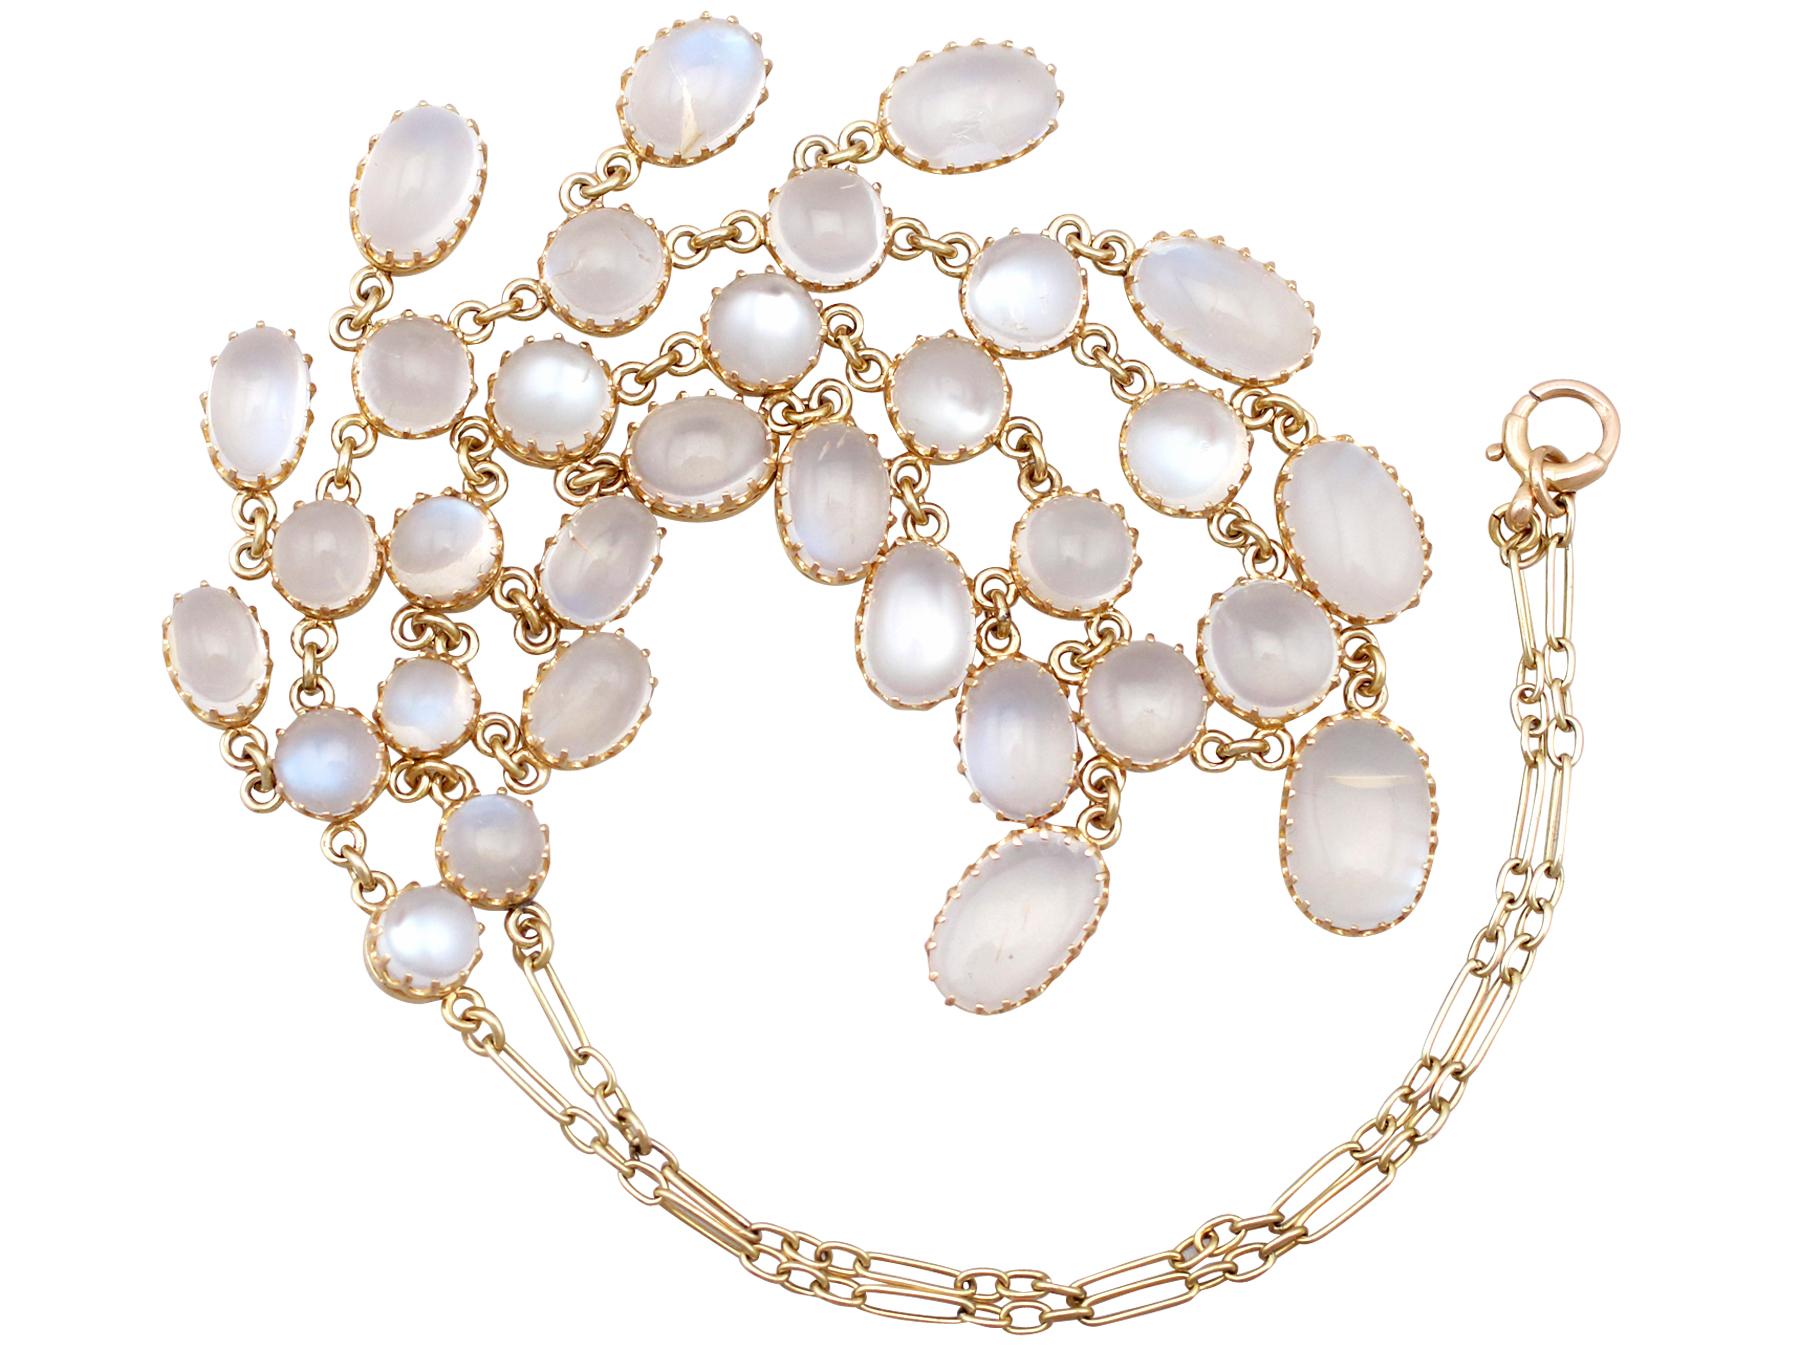 Antique 1900s 42.20 Carat Moonstone and Yellow Gold Necklace at 1stDibs